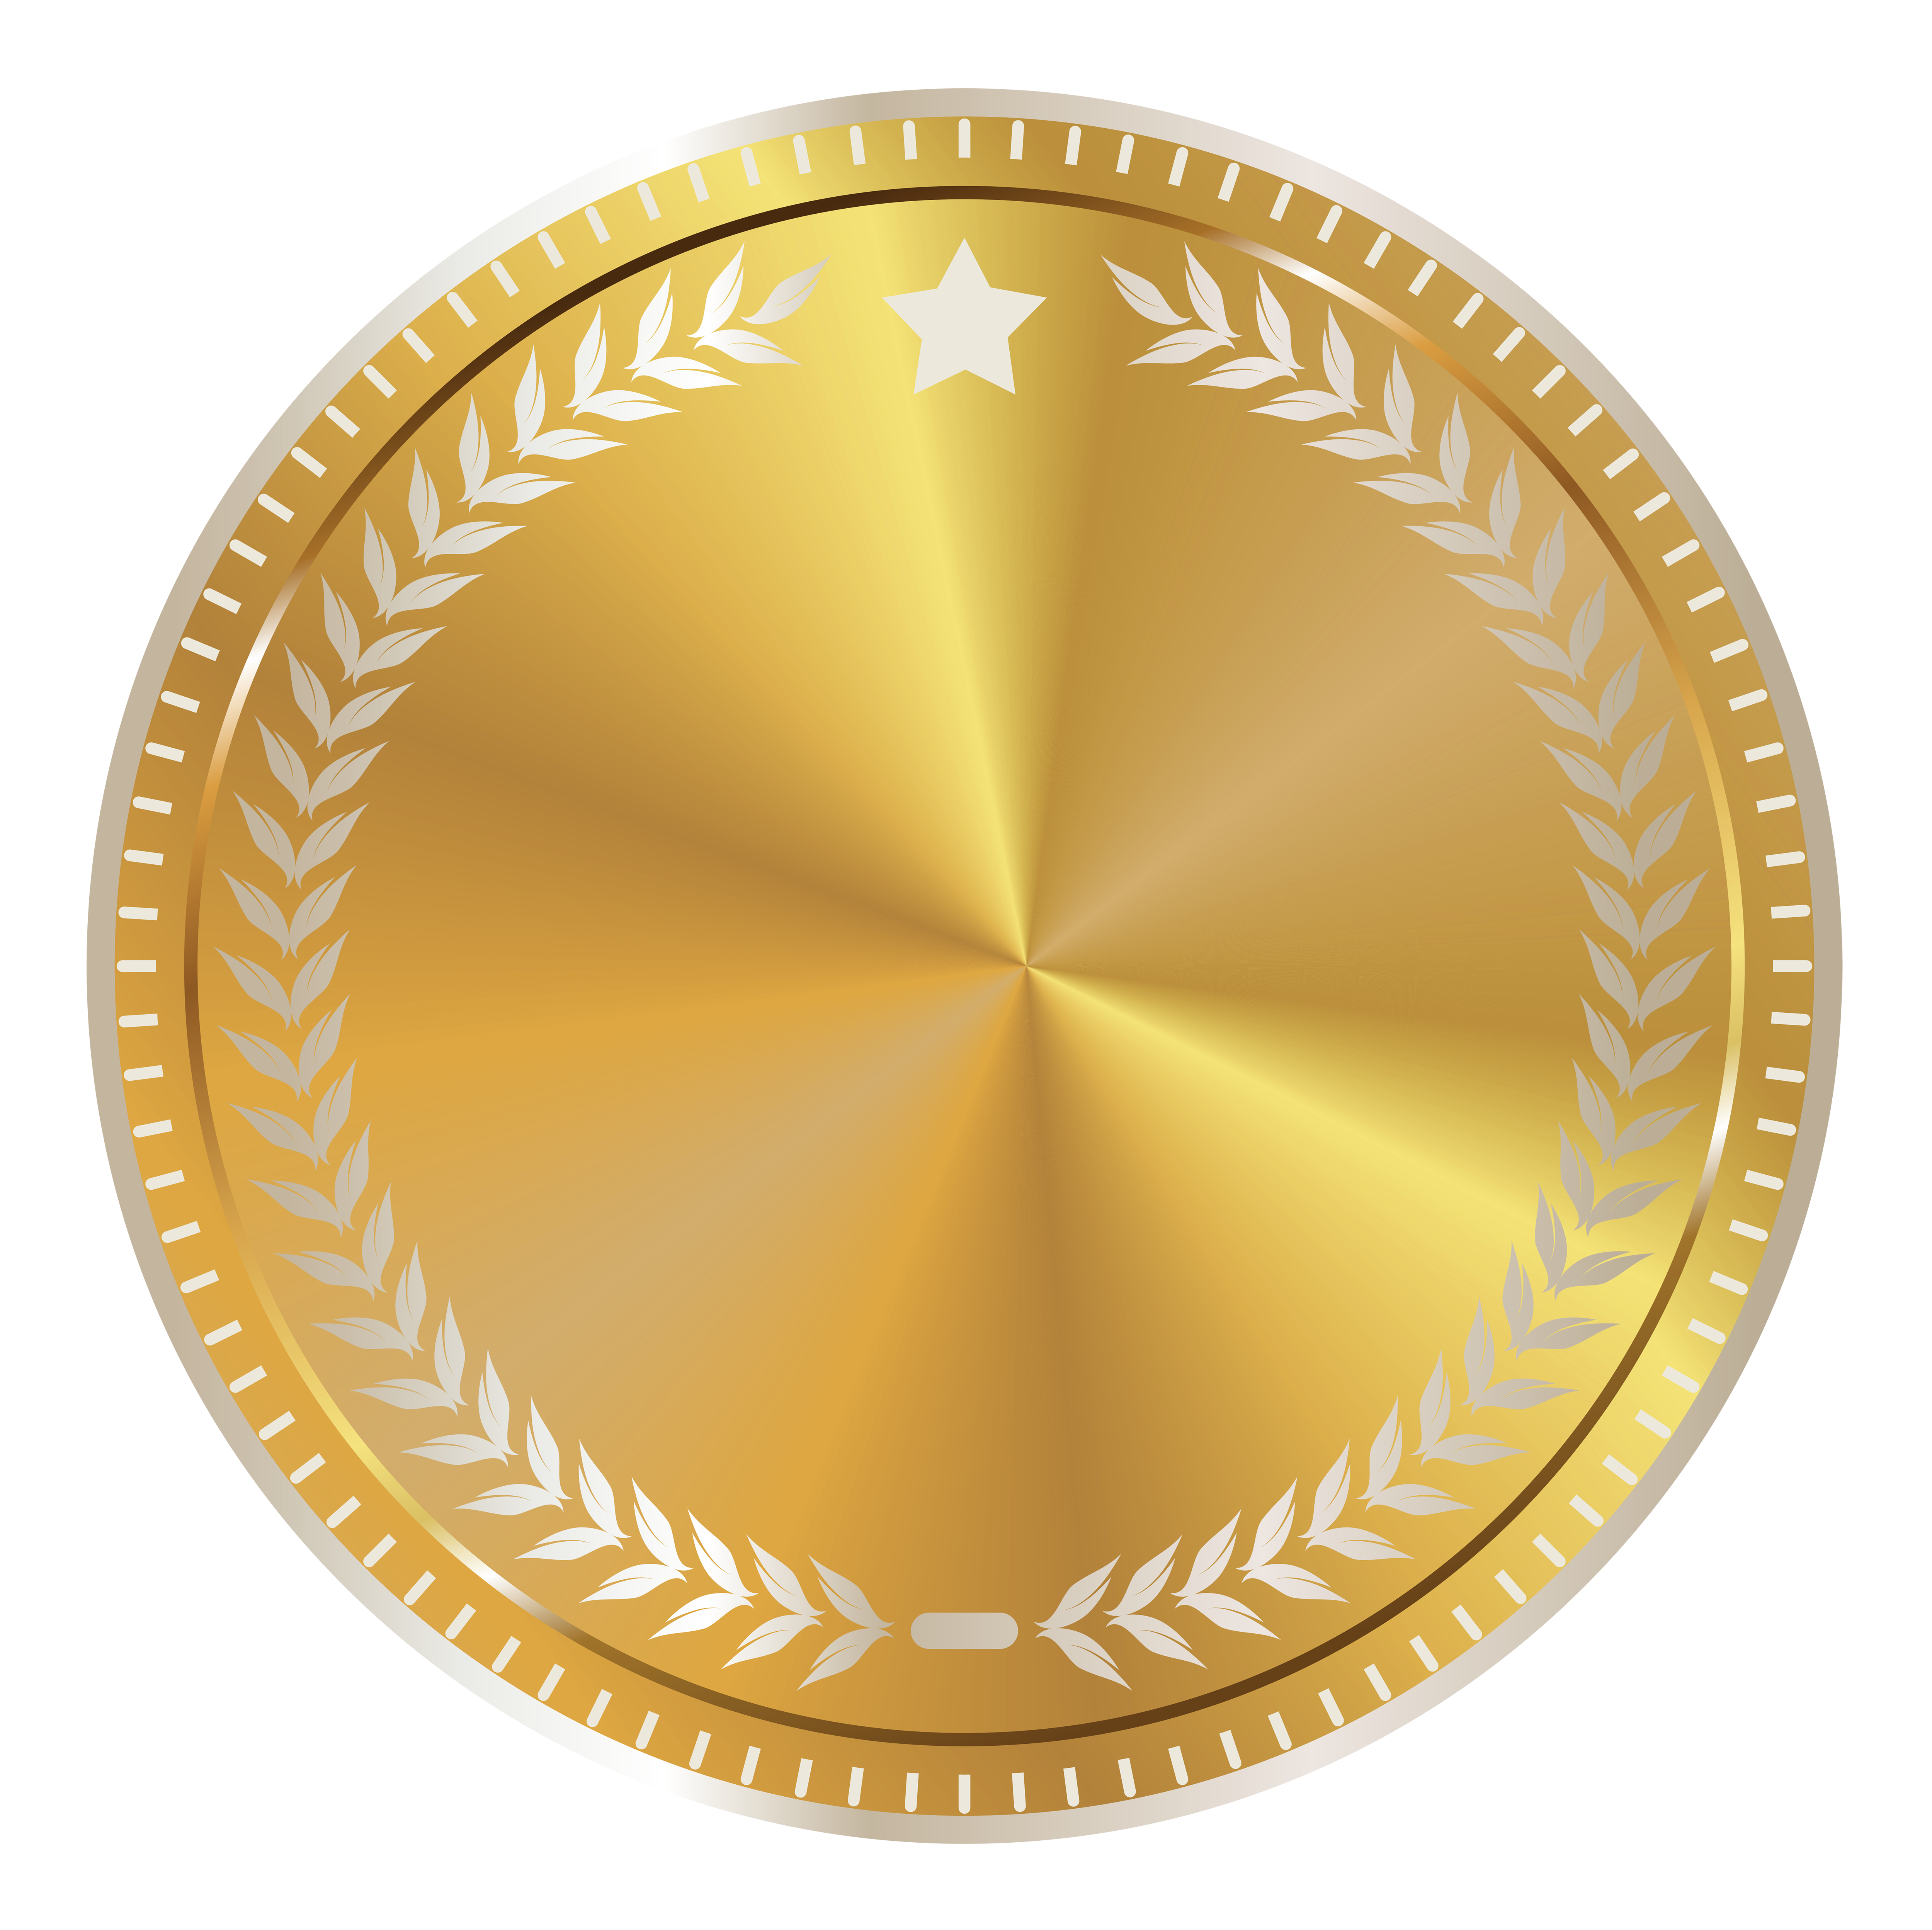 Gold Seal Badge with Decoration PNG Clipart Image 